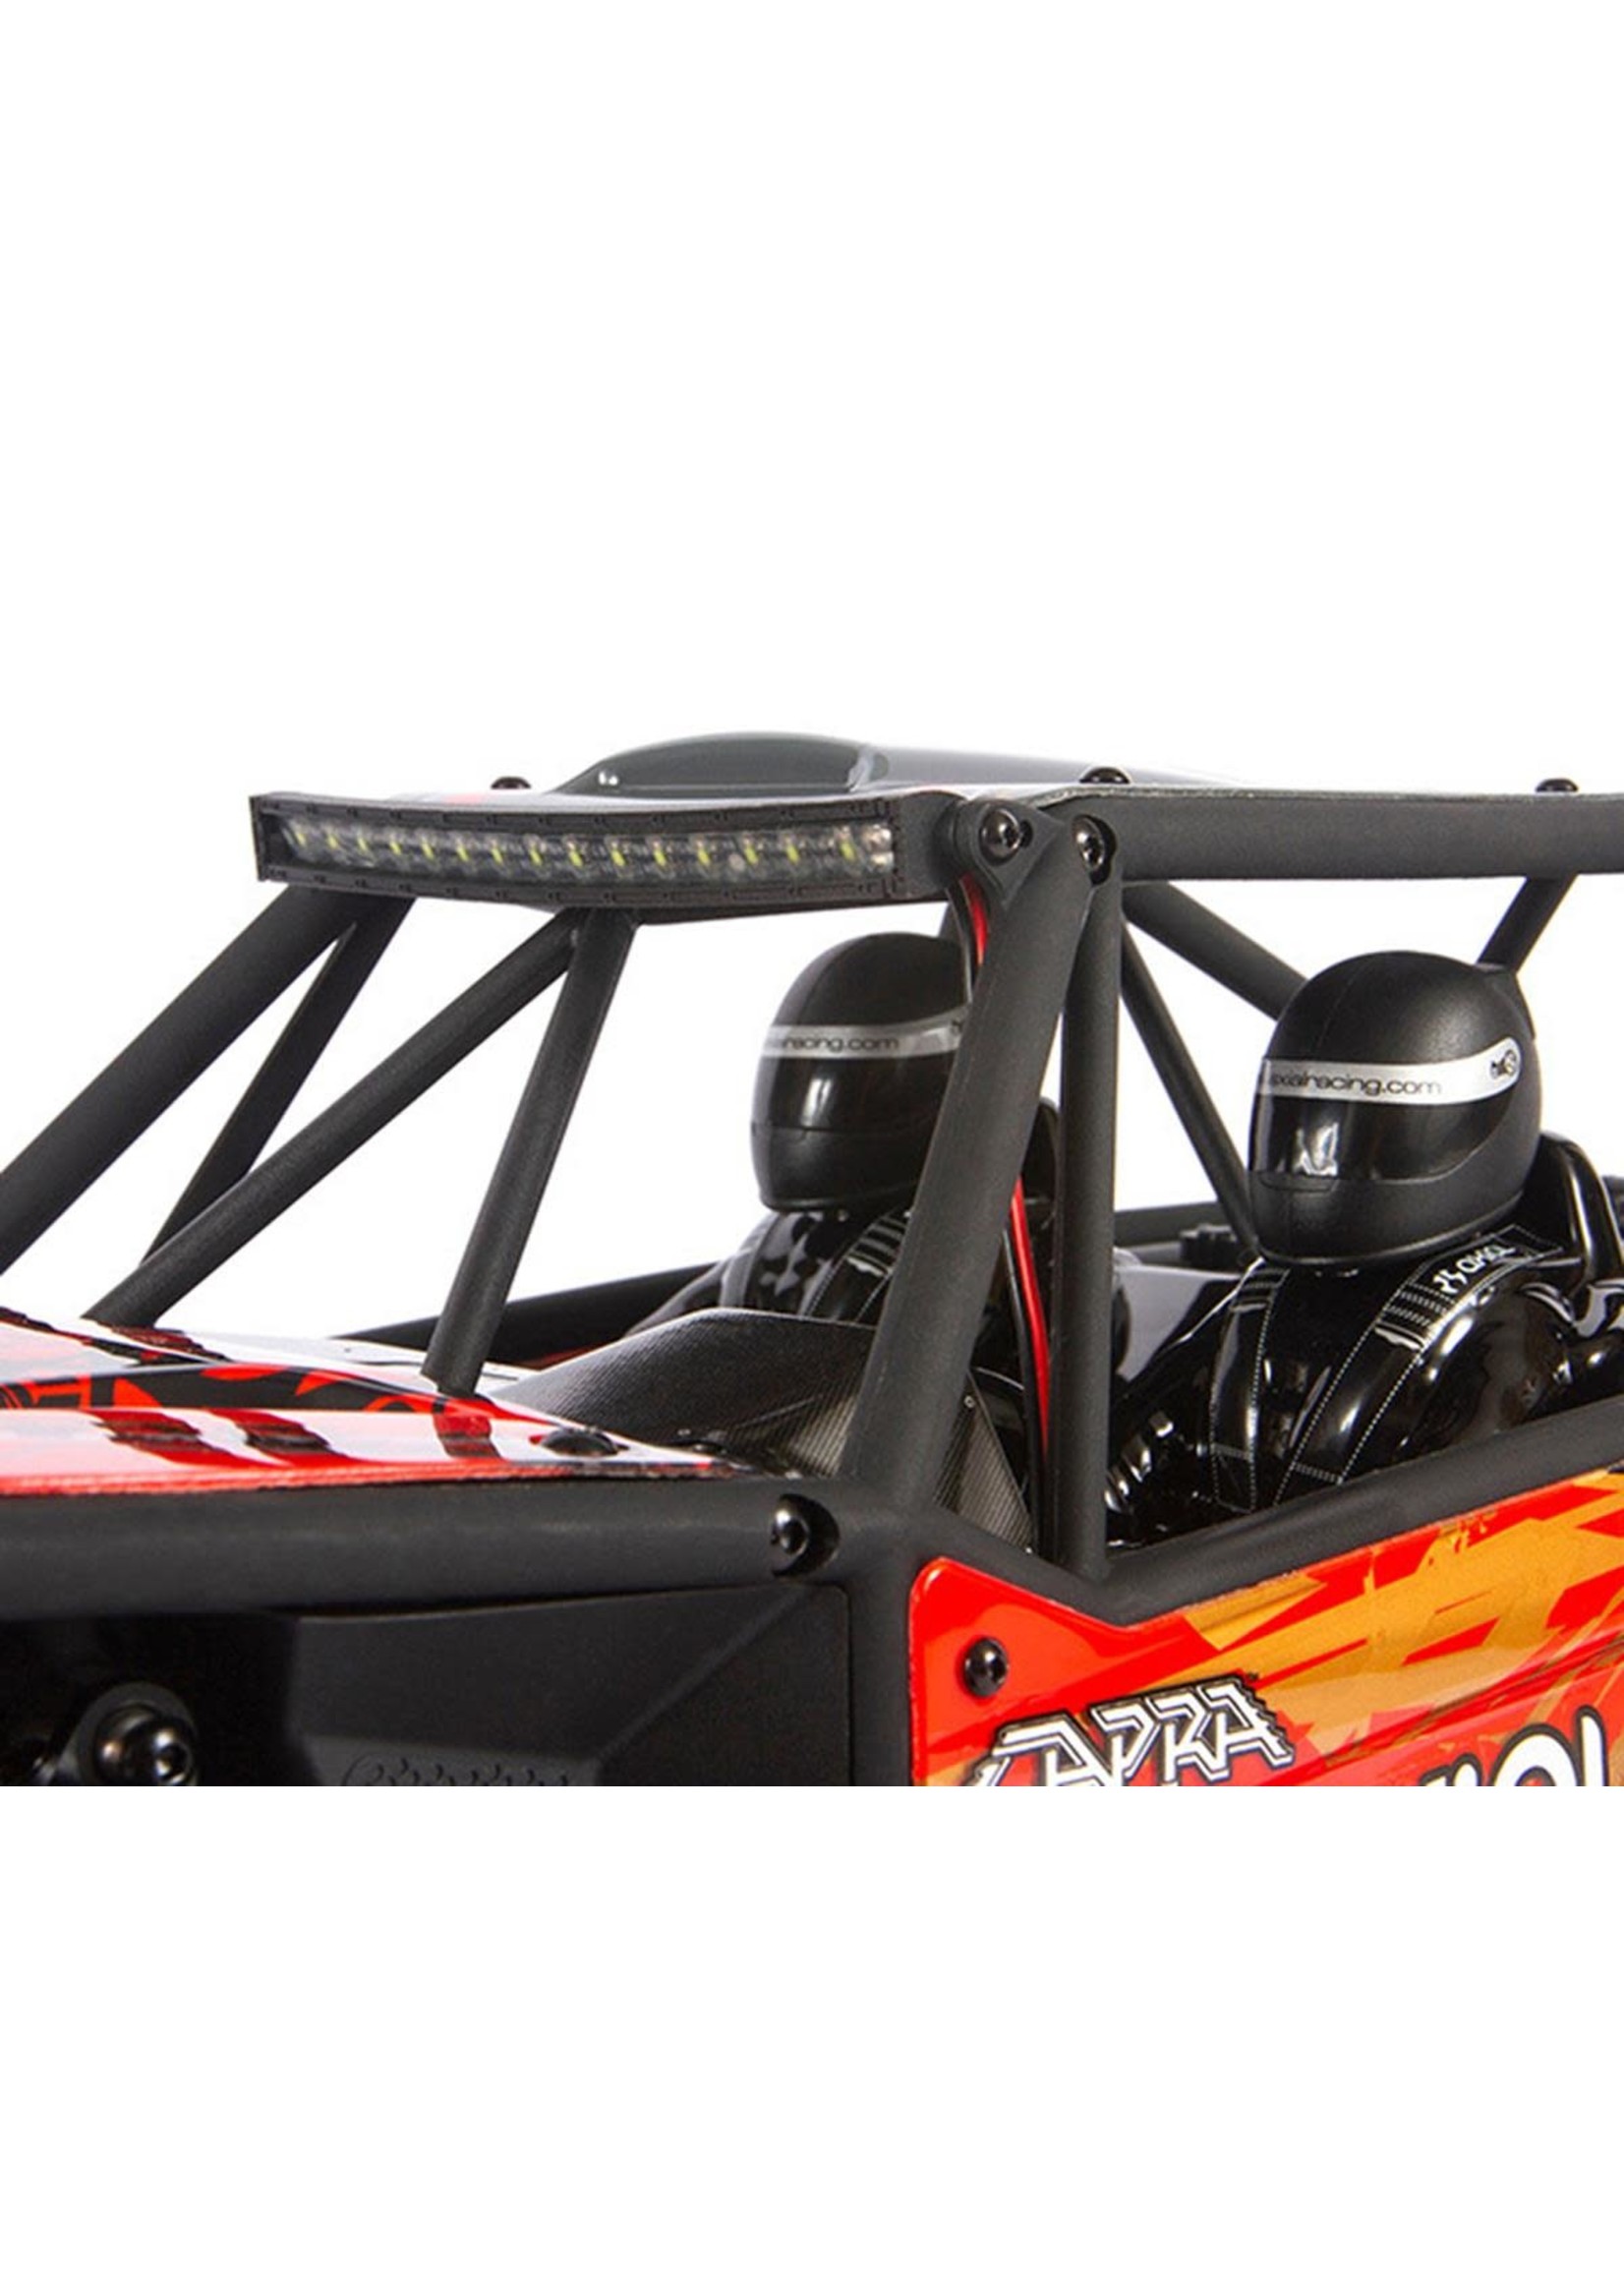 Axial AXI03000BT1 Axial Capra 1.9 Unlimited Trail Buggy 1/10 RTR 4WD Rock Crawler (Red) w/Brushed Motor & 2.4GHz Radio